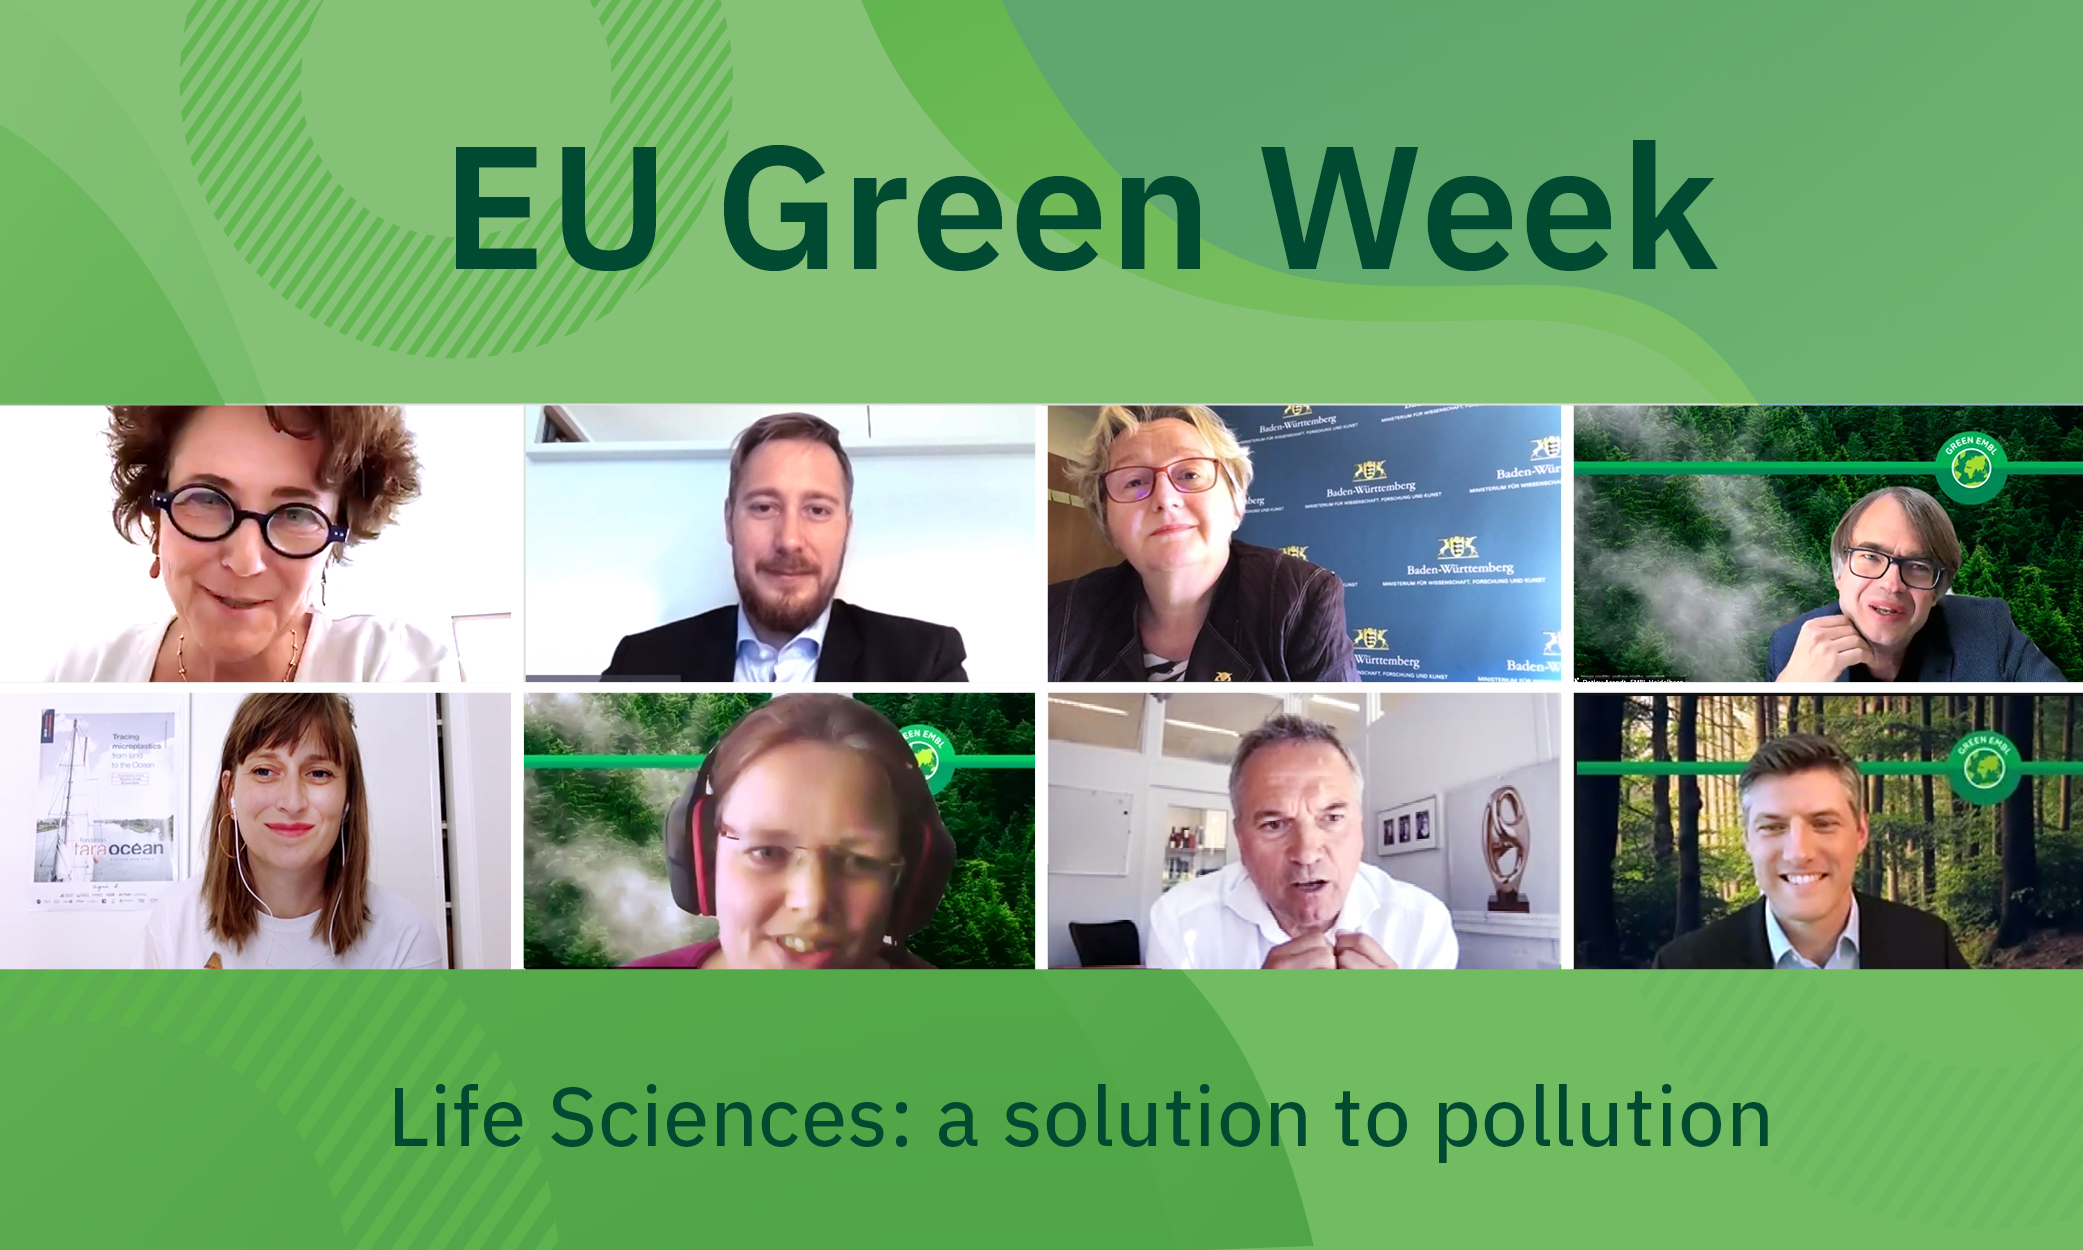 8 headshots of representatives from science, industry and government are displayed against a green background for EU Green Week